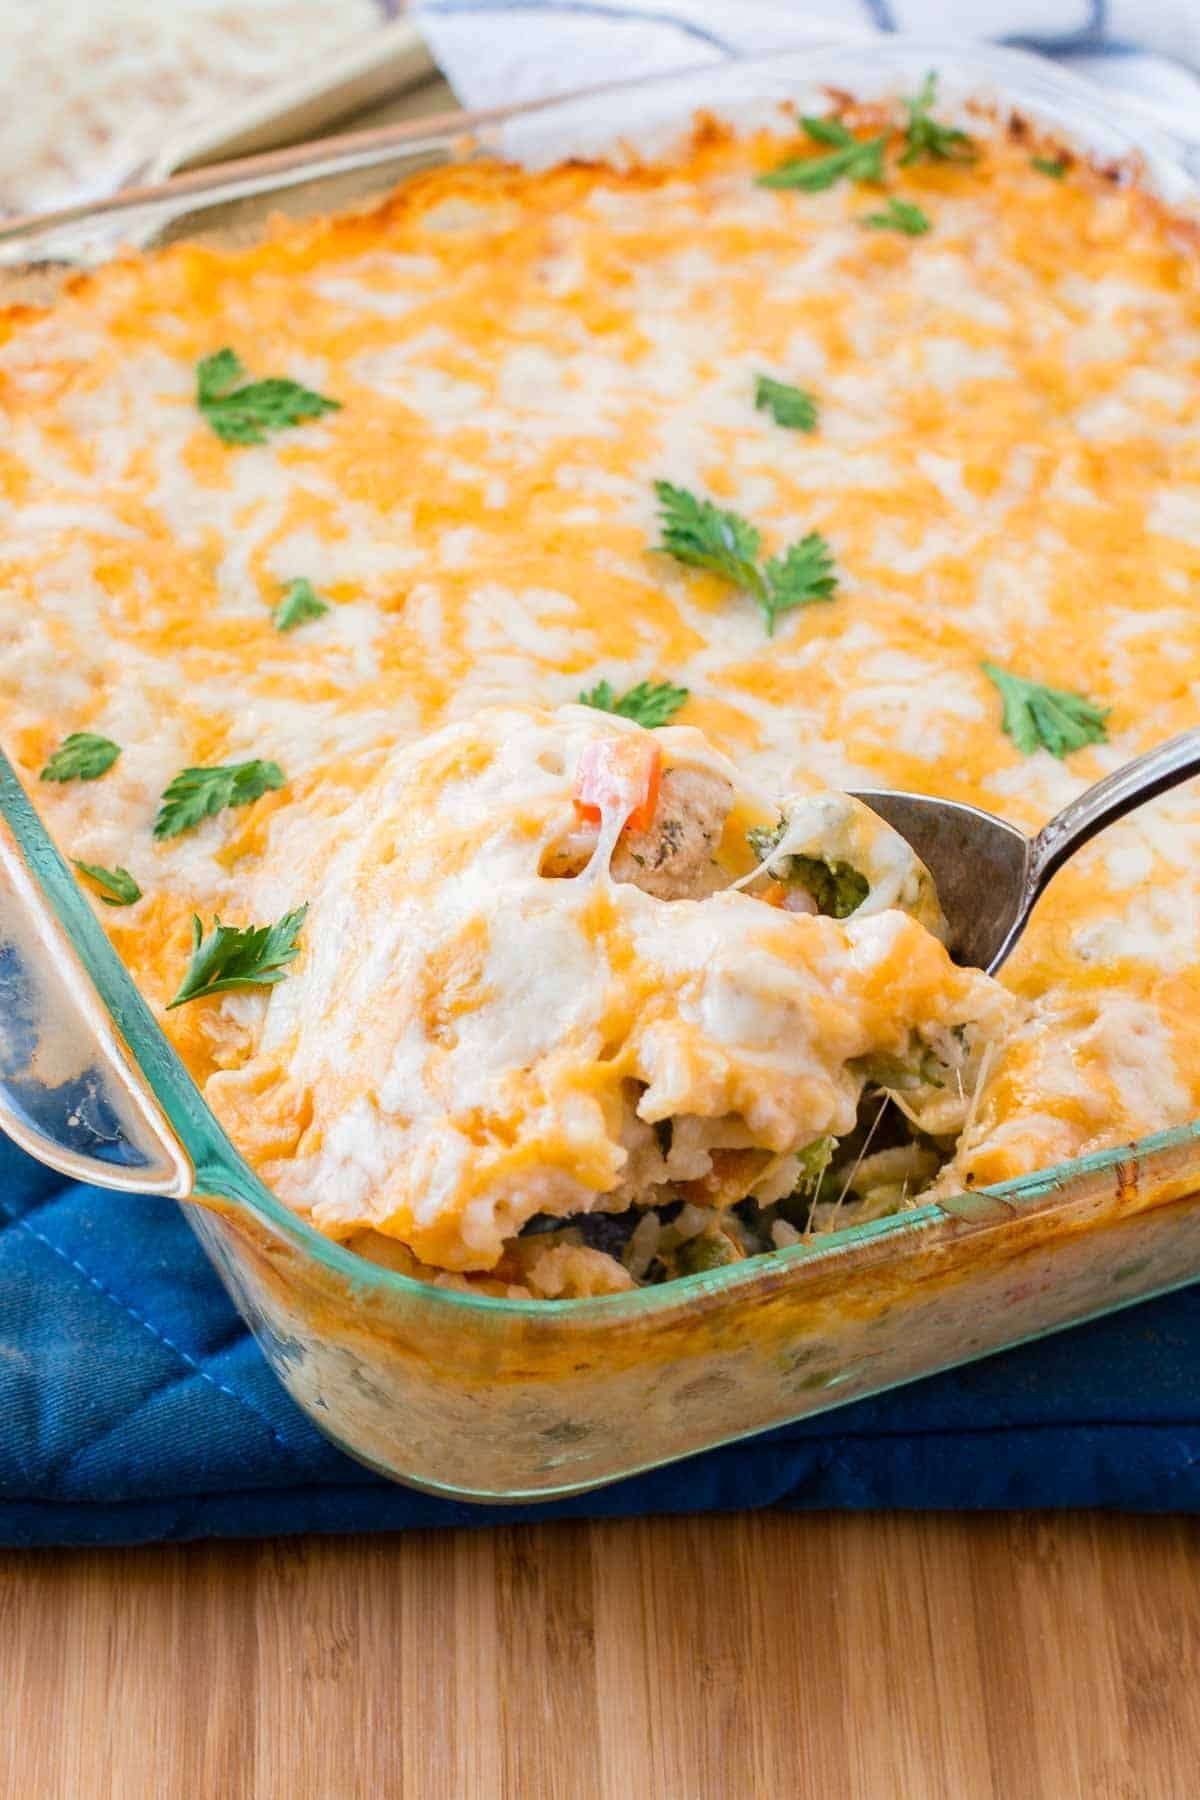 10 Trendy Chicken And Rice Dinner Ideas cheesy chicken and rice casserole oh sweet basil 4 2022